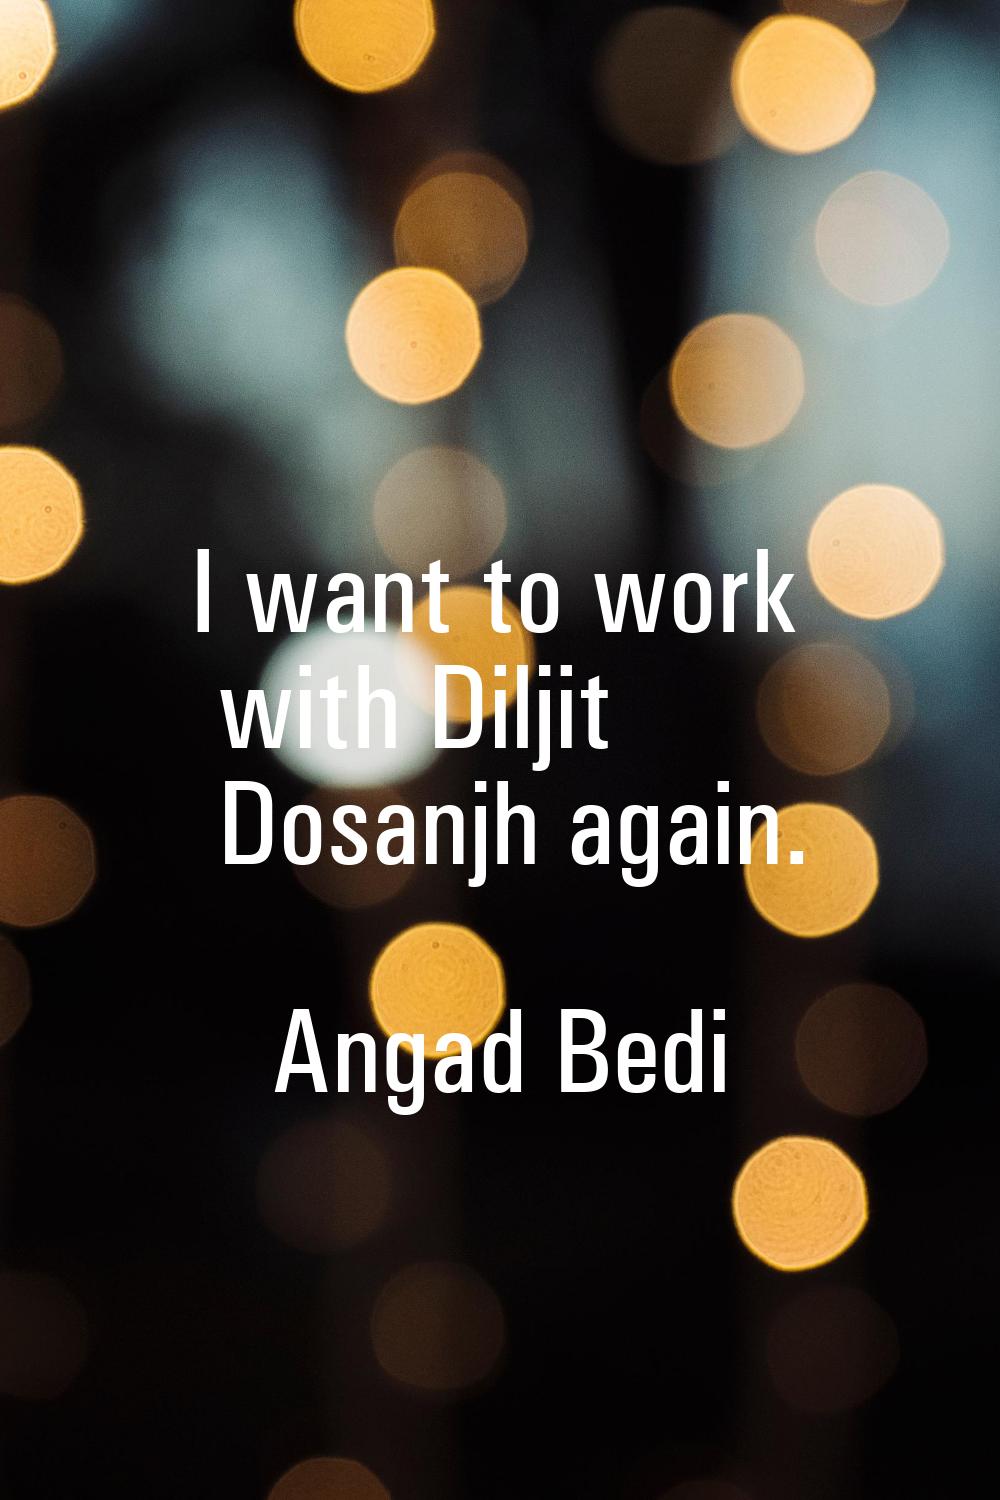 I want to work with Diljit Dosanjh again.